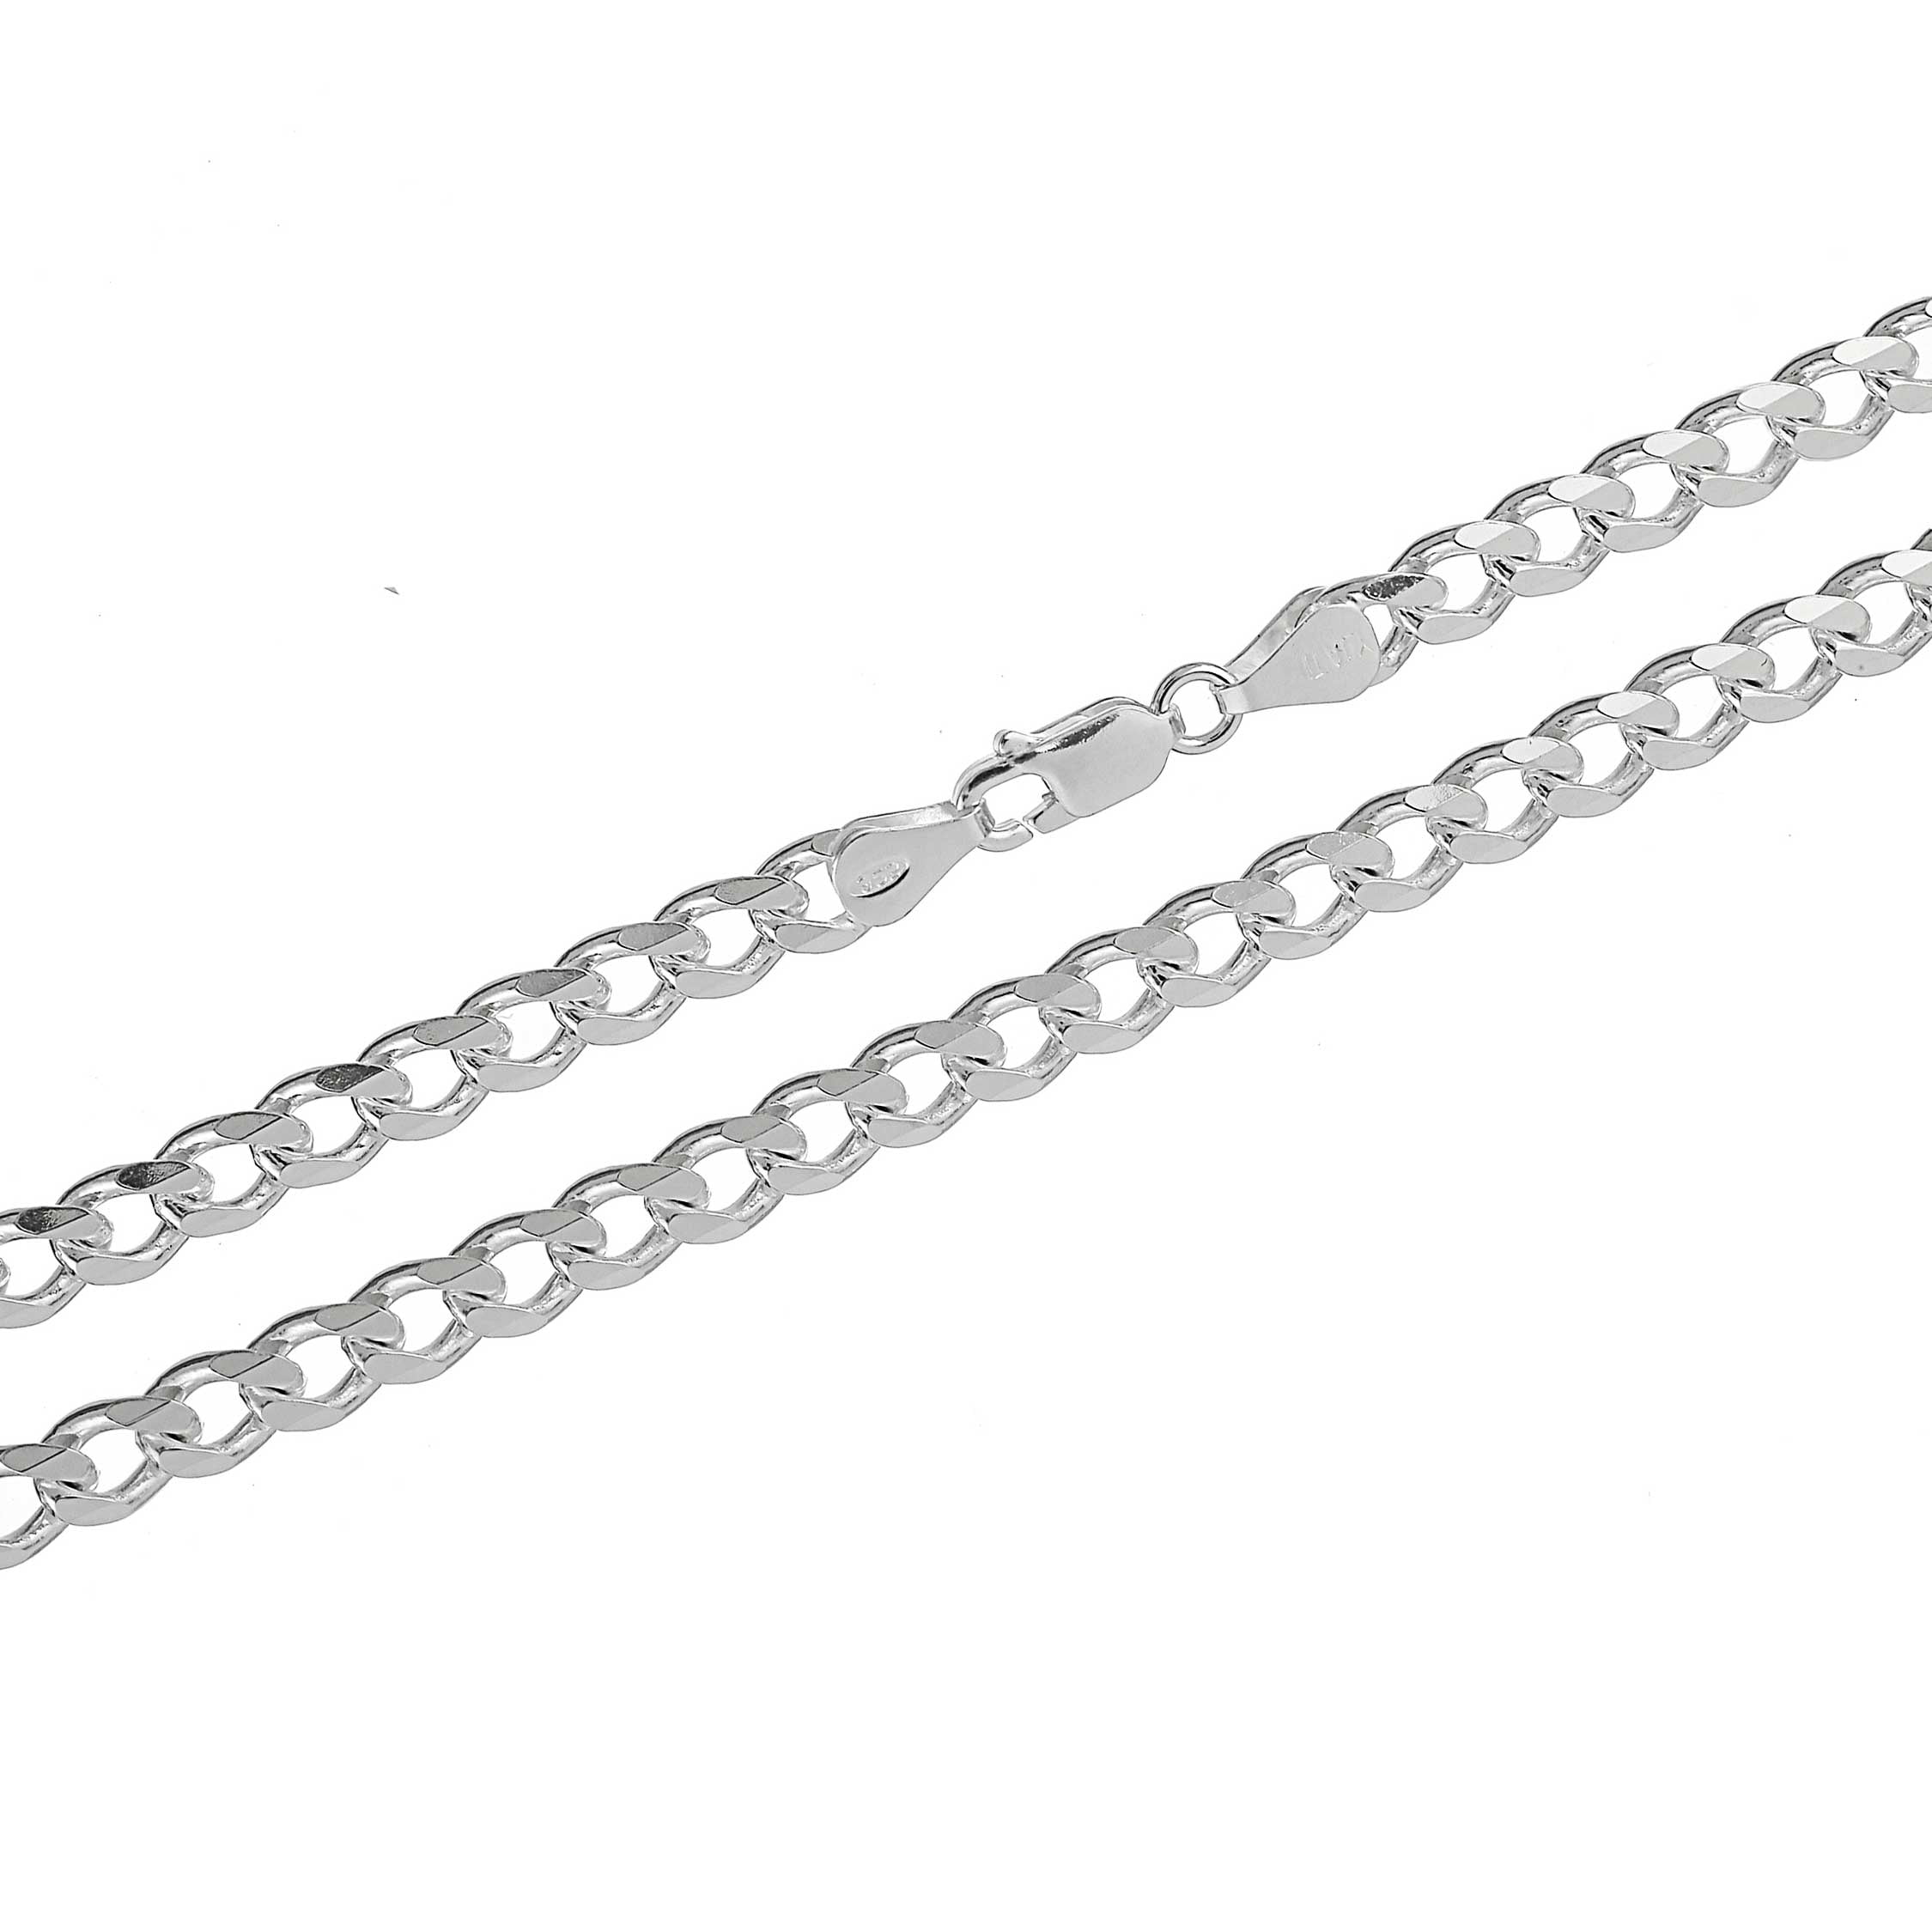 Stunning 5mm 925 Sterling Silver Cuban Curb Link Chain Necklace 20 Inches